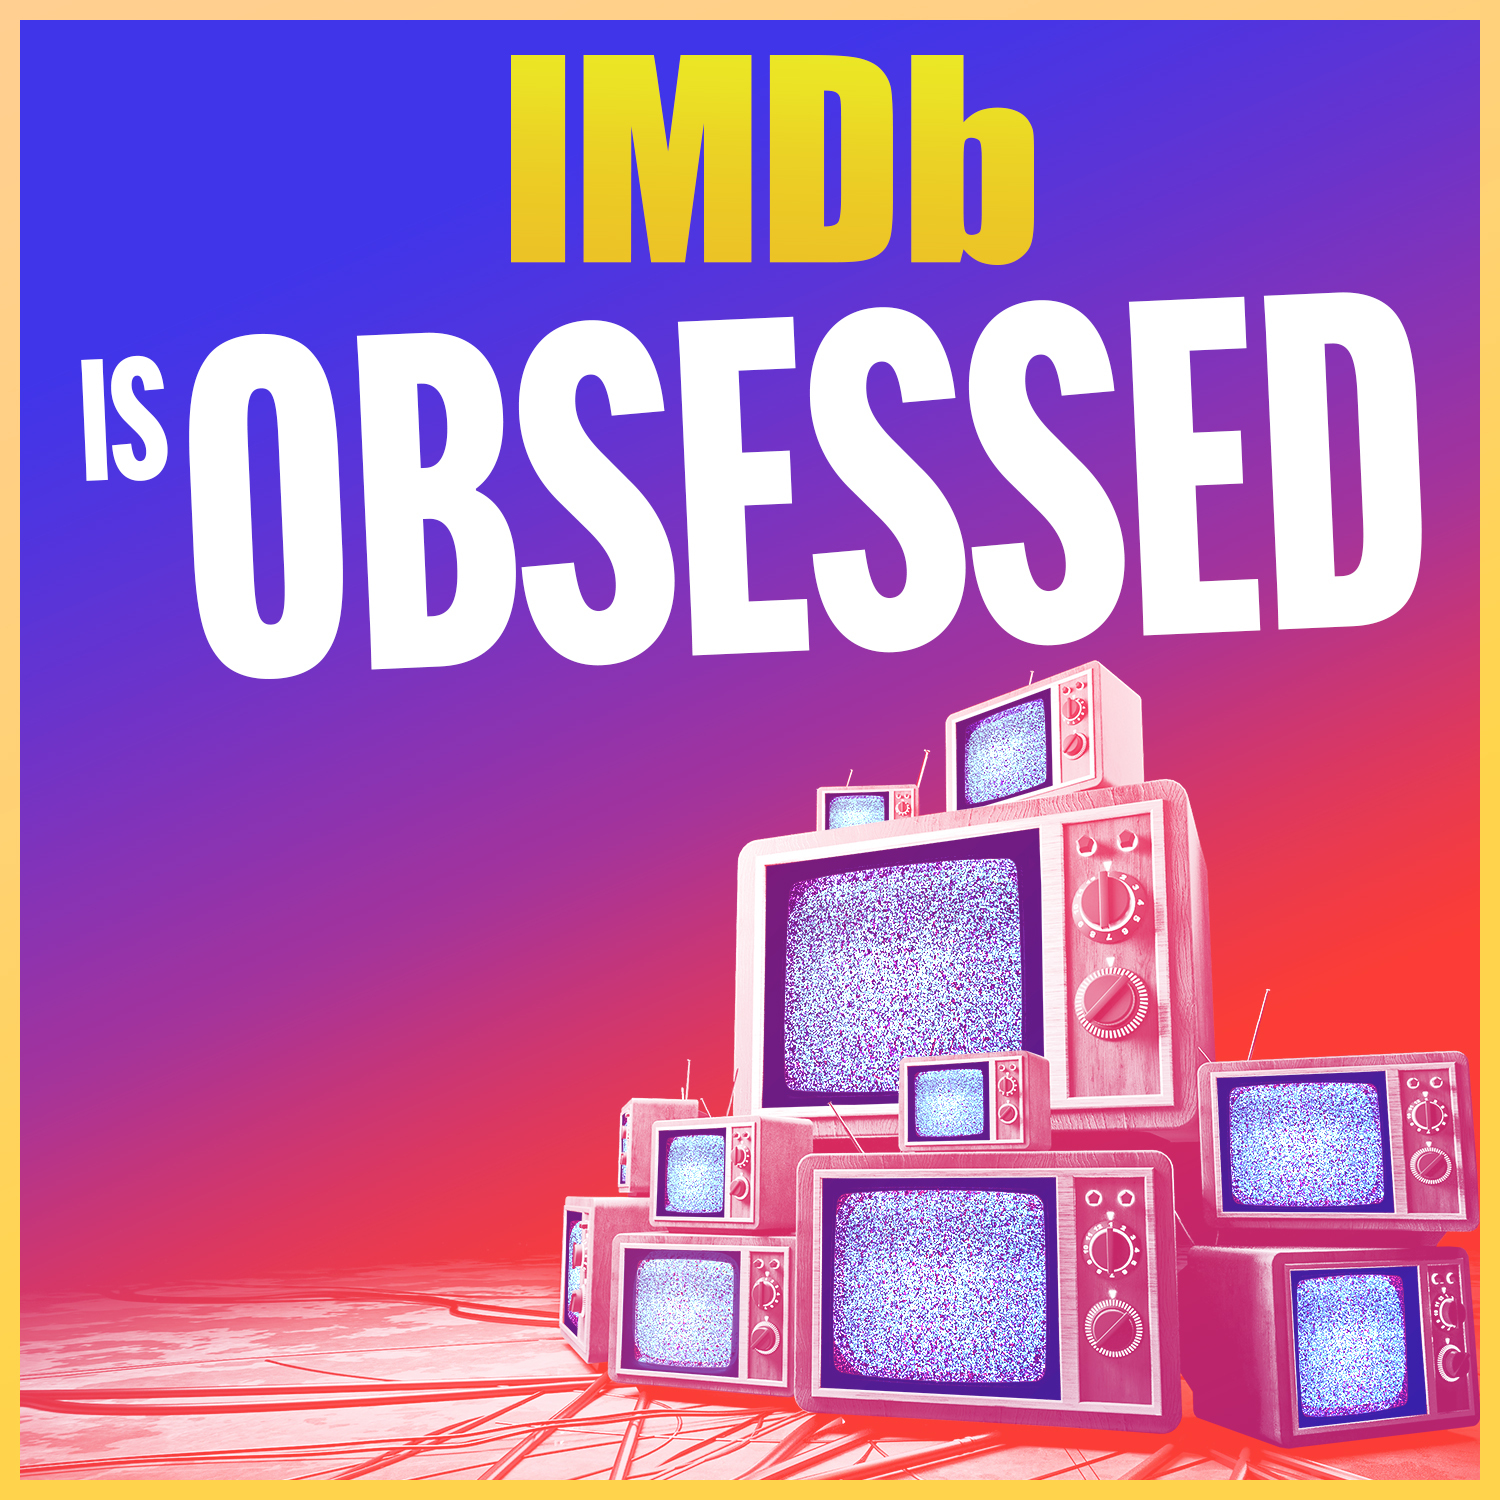 INTRODUCING: Updated IMDb.com Title page experience